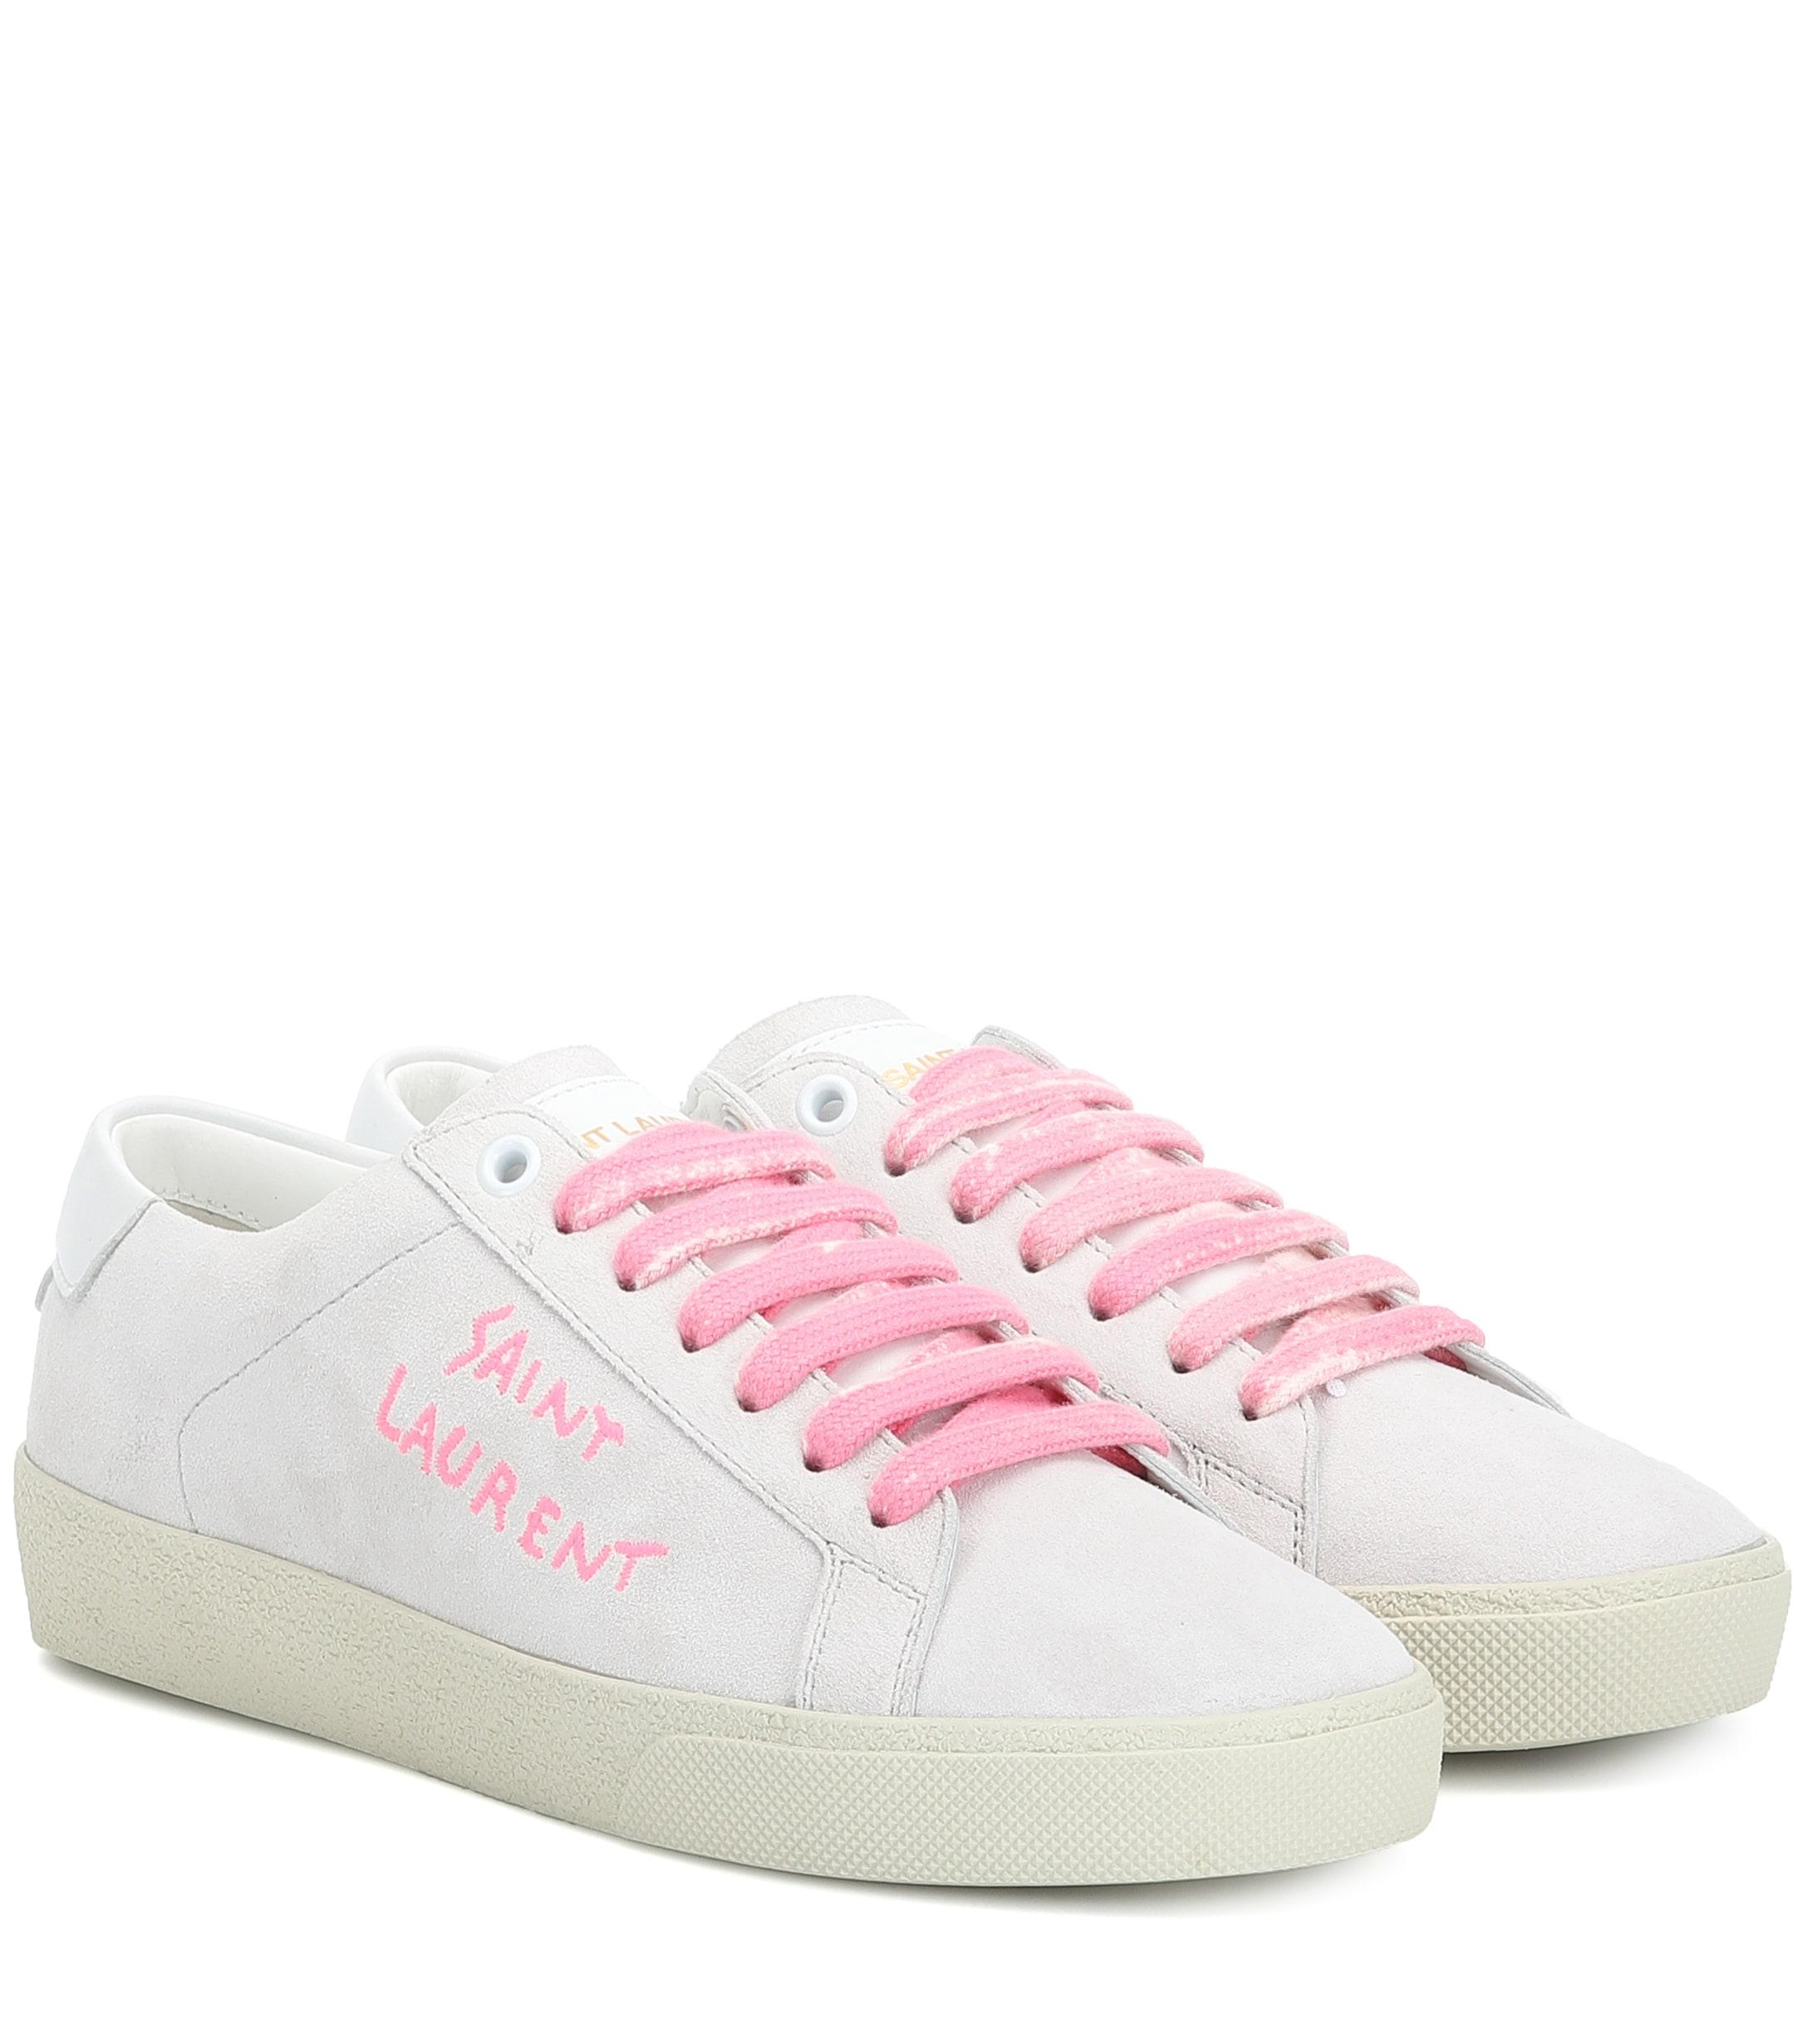 Saint Laurent Court Classic Sl/06 Sneakers in White - Save 62% - Lyst